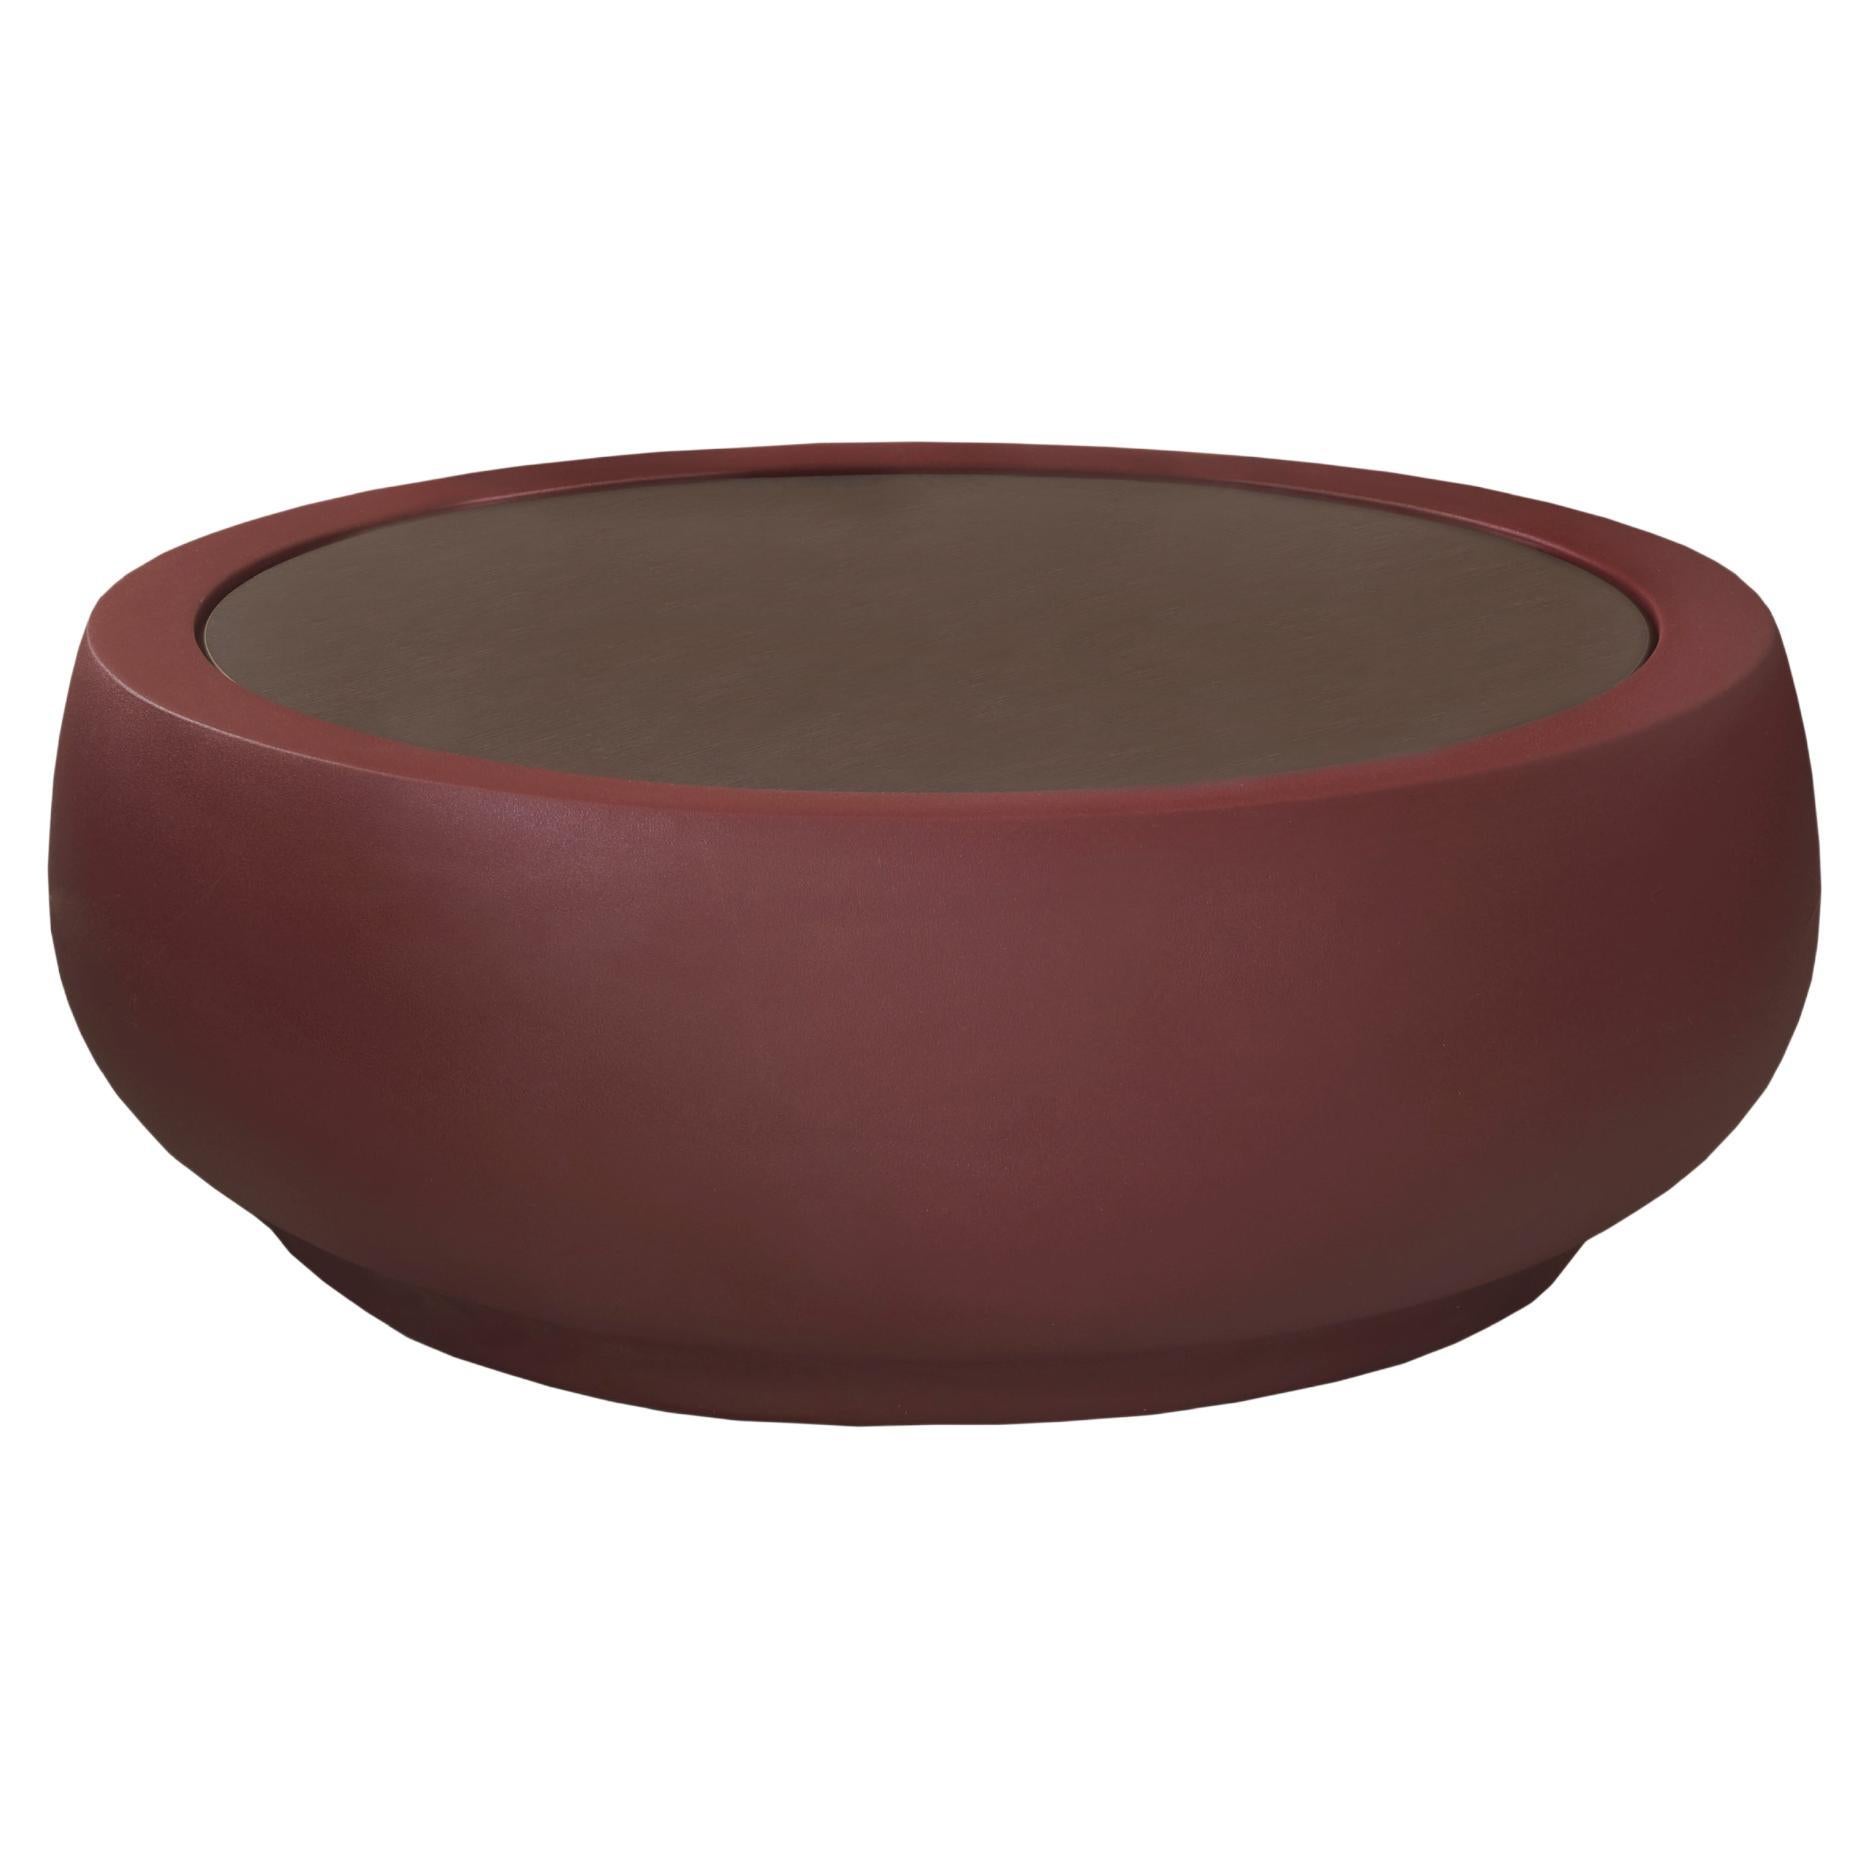 Slide Design Chubby Side Table in Mahogany Leather Base with Wengé Top